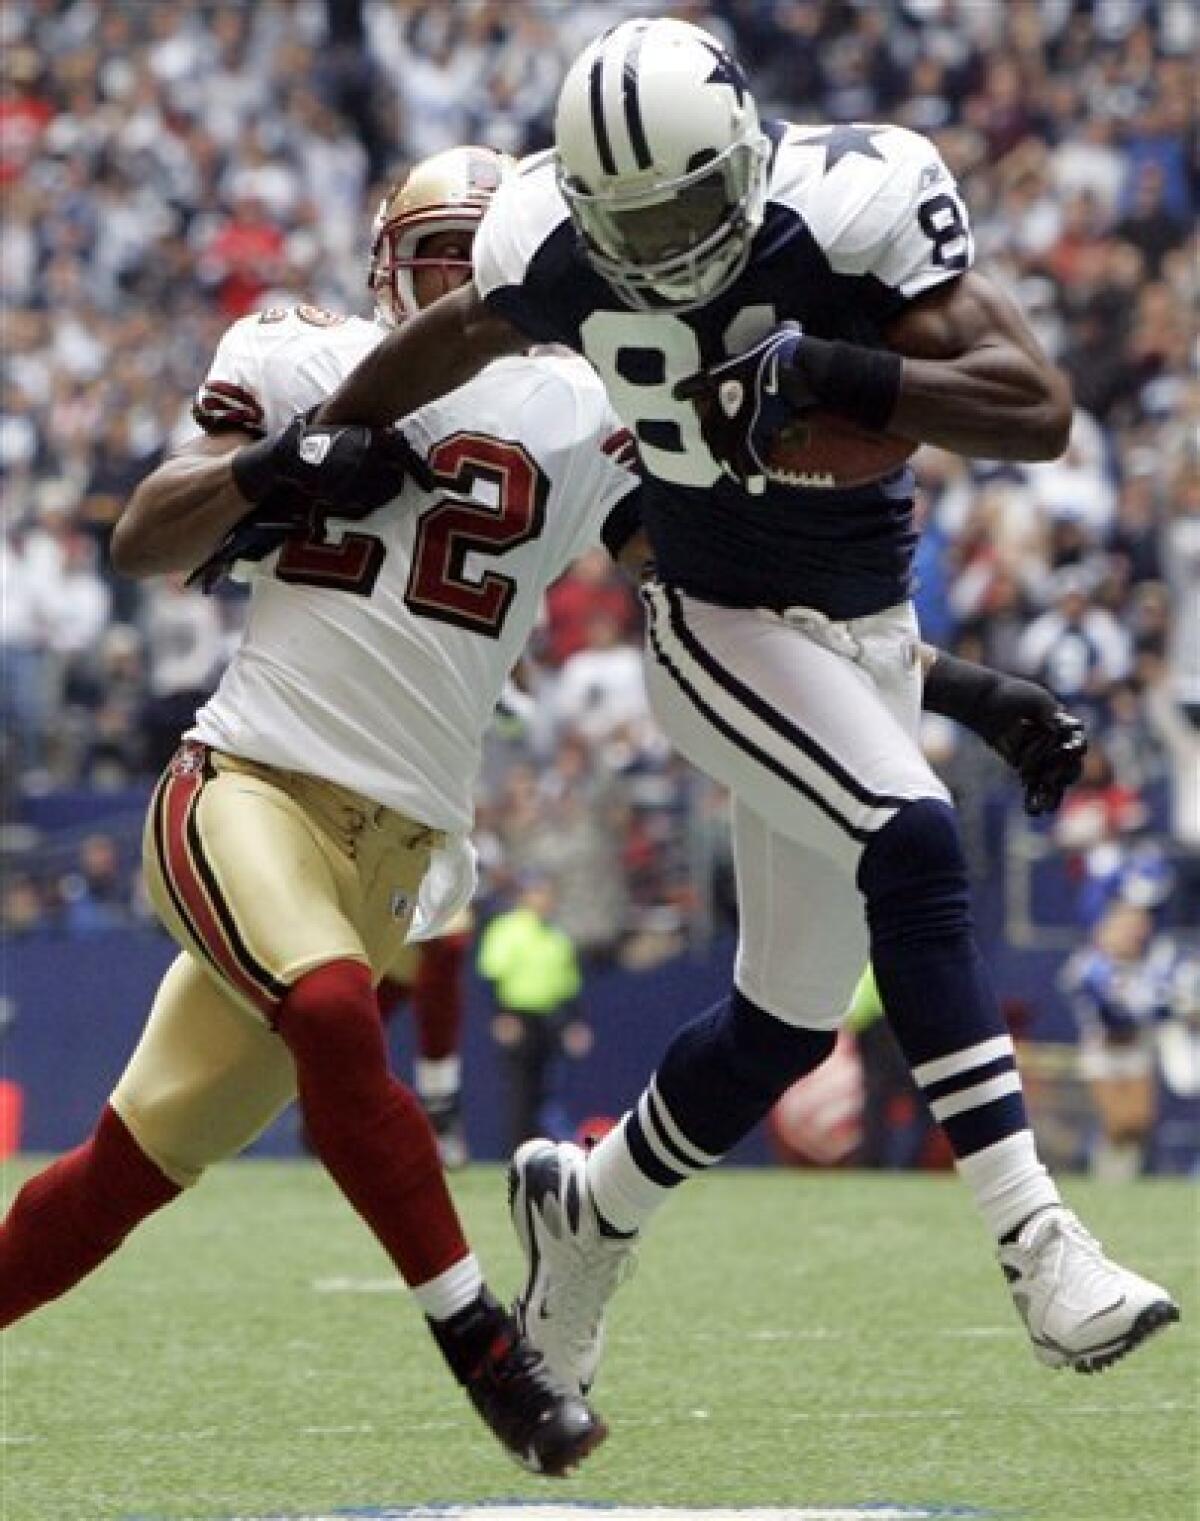 TO snags 7 catches as Cowboys defeat 49ers 35-22 - The San Diego